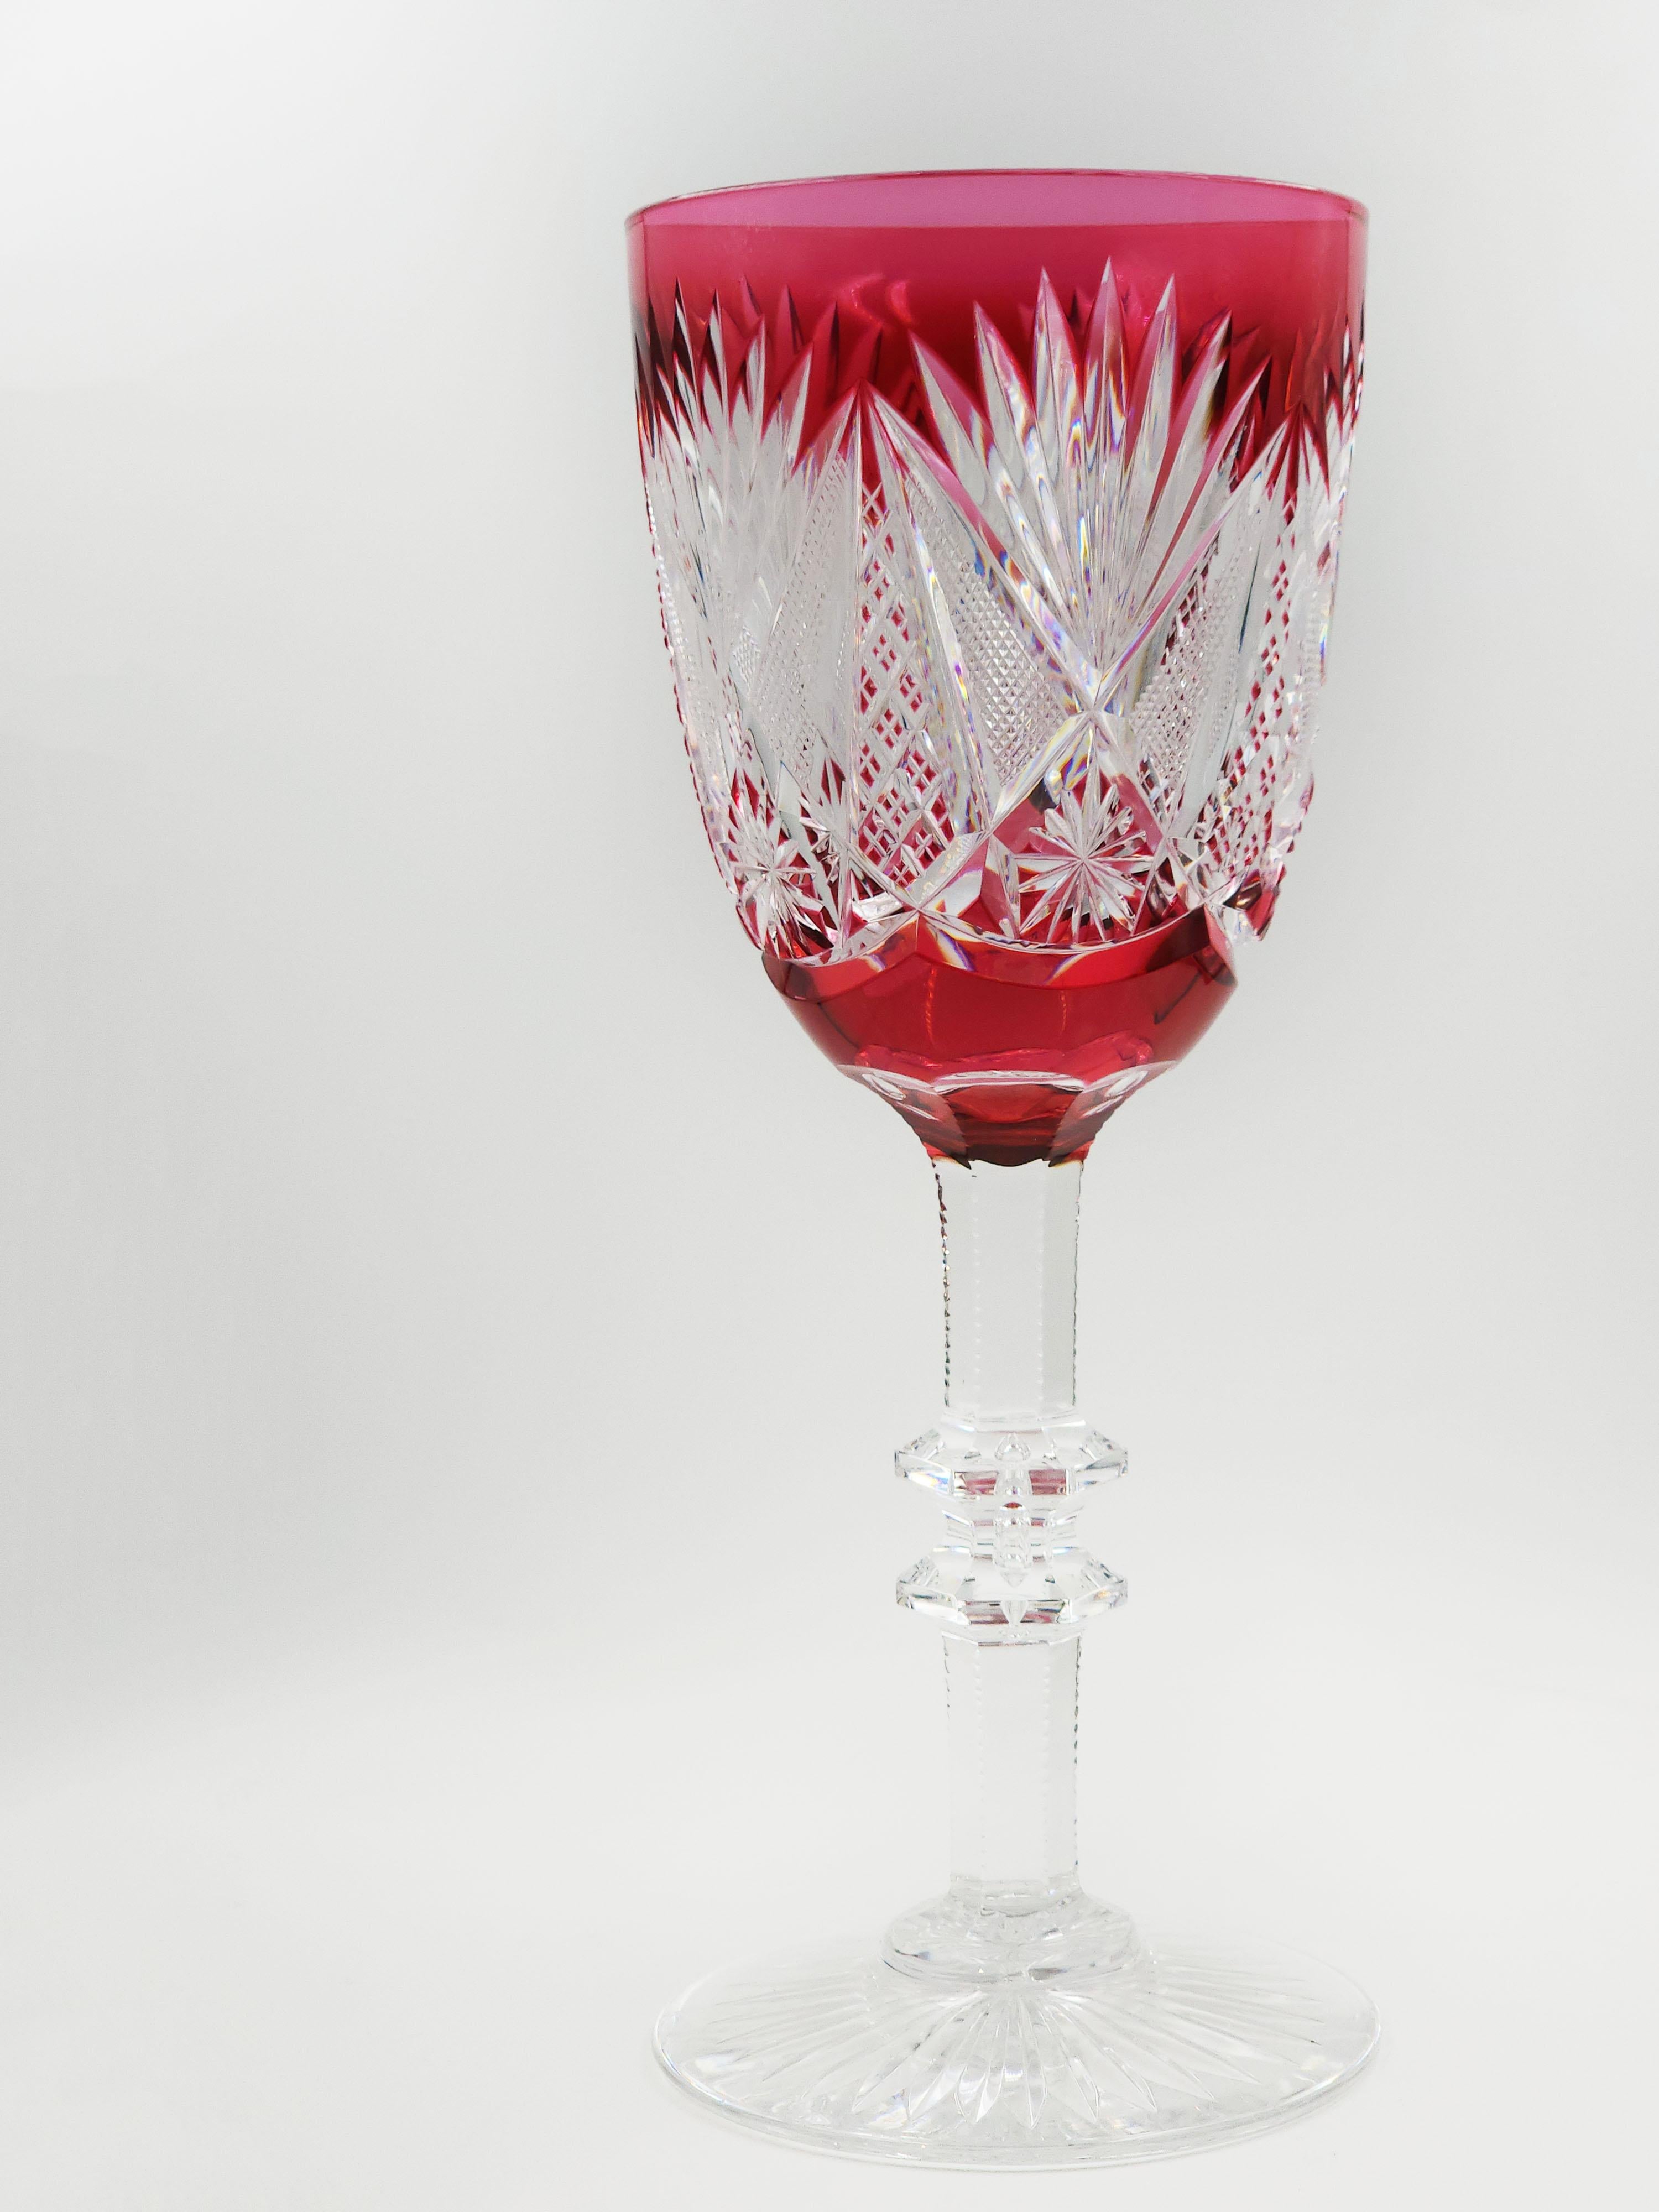 Val Saint Lambert Cut Crystal Bridal Goblet
Decorative cut glass goblet in red color with an intricate but at the same time luxurious design, the stem of the goblet also has additional details.
Measures:
Height: 25.5 centimeters
Diameter: 11